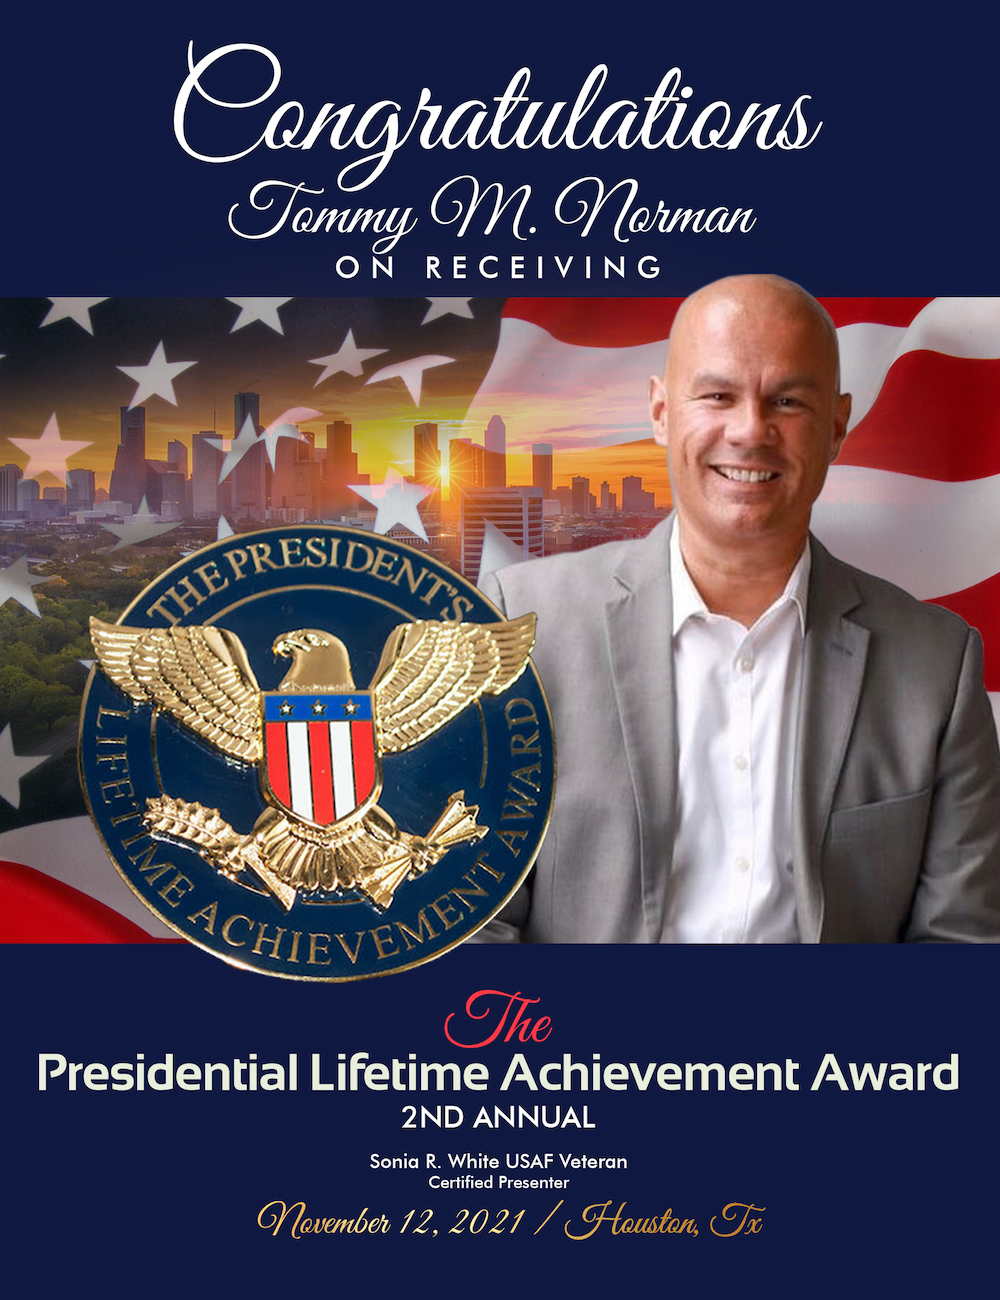 The Presidential Lifetime Achievement Awards Return for the 2nd Year to